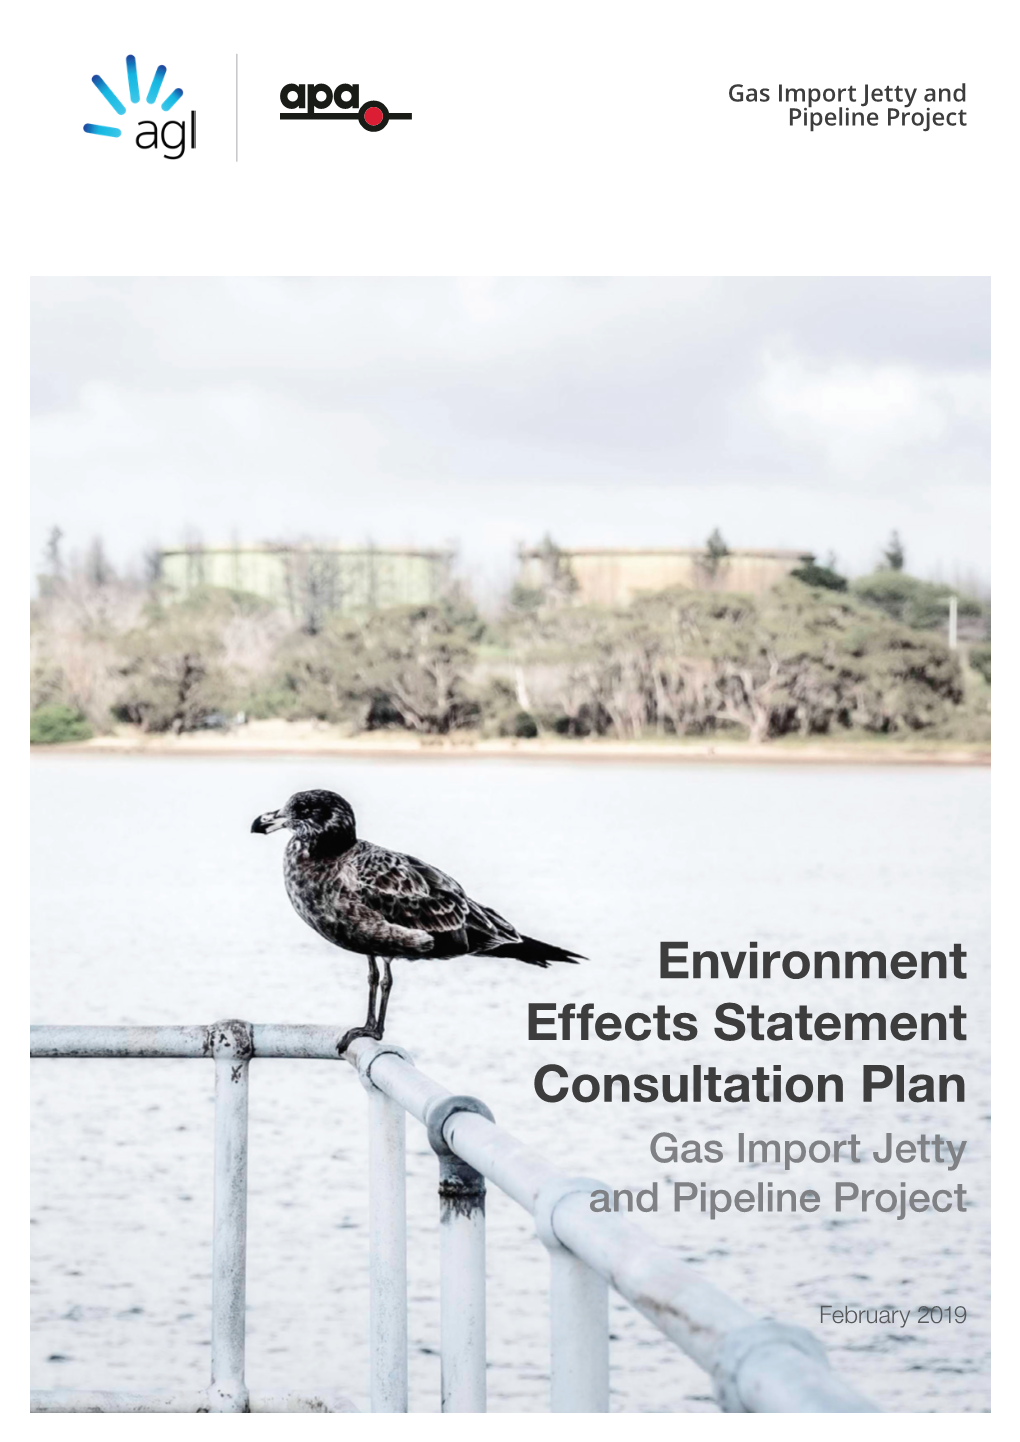 Environment Effects Statement Consultation Plan Gas Import Jetty and Pipeline Project